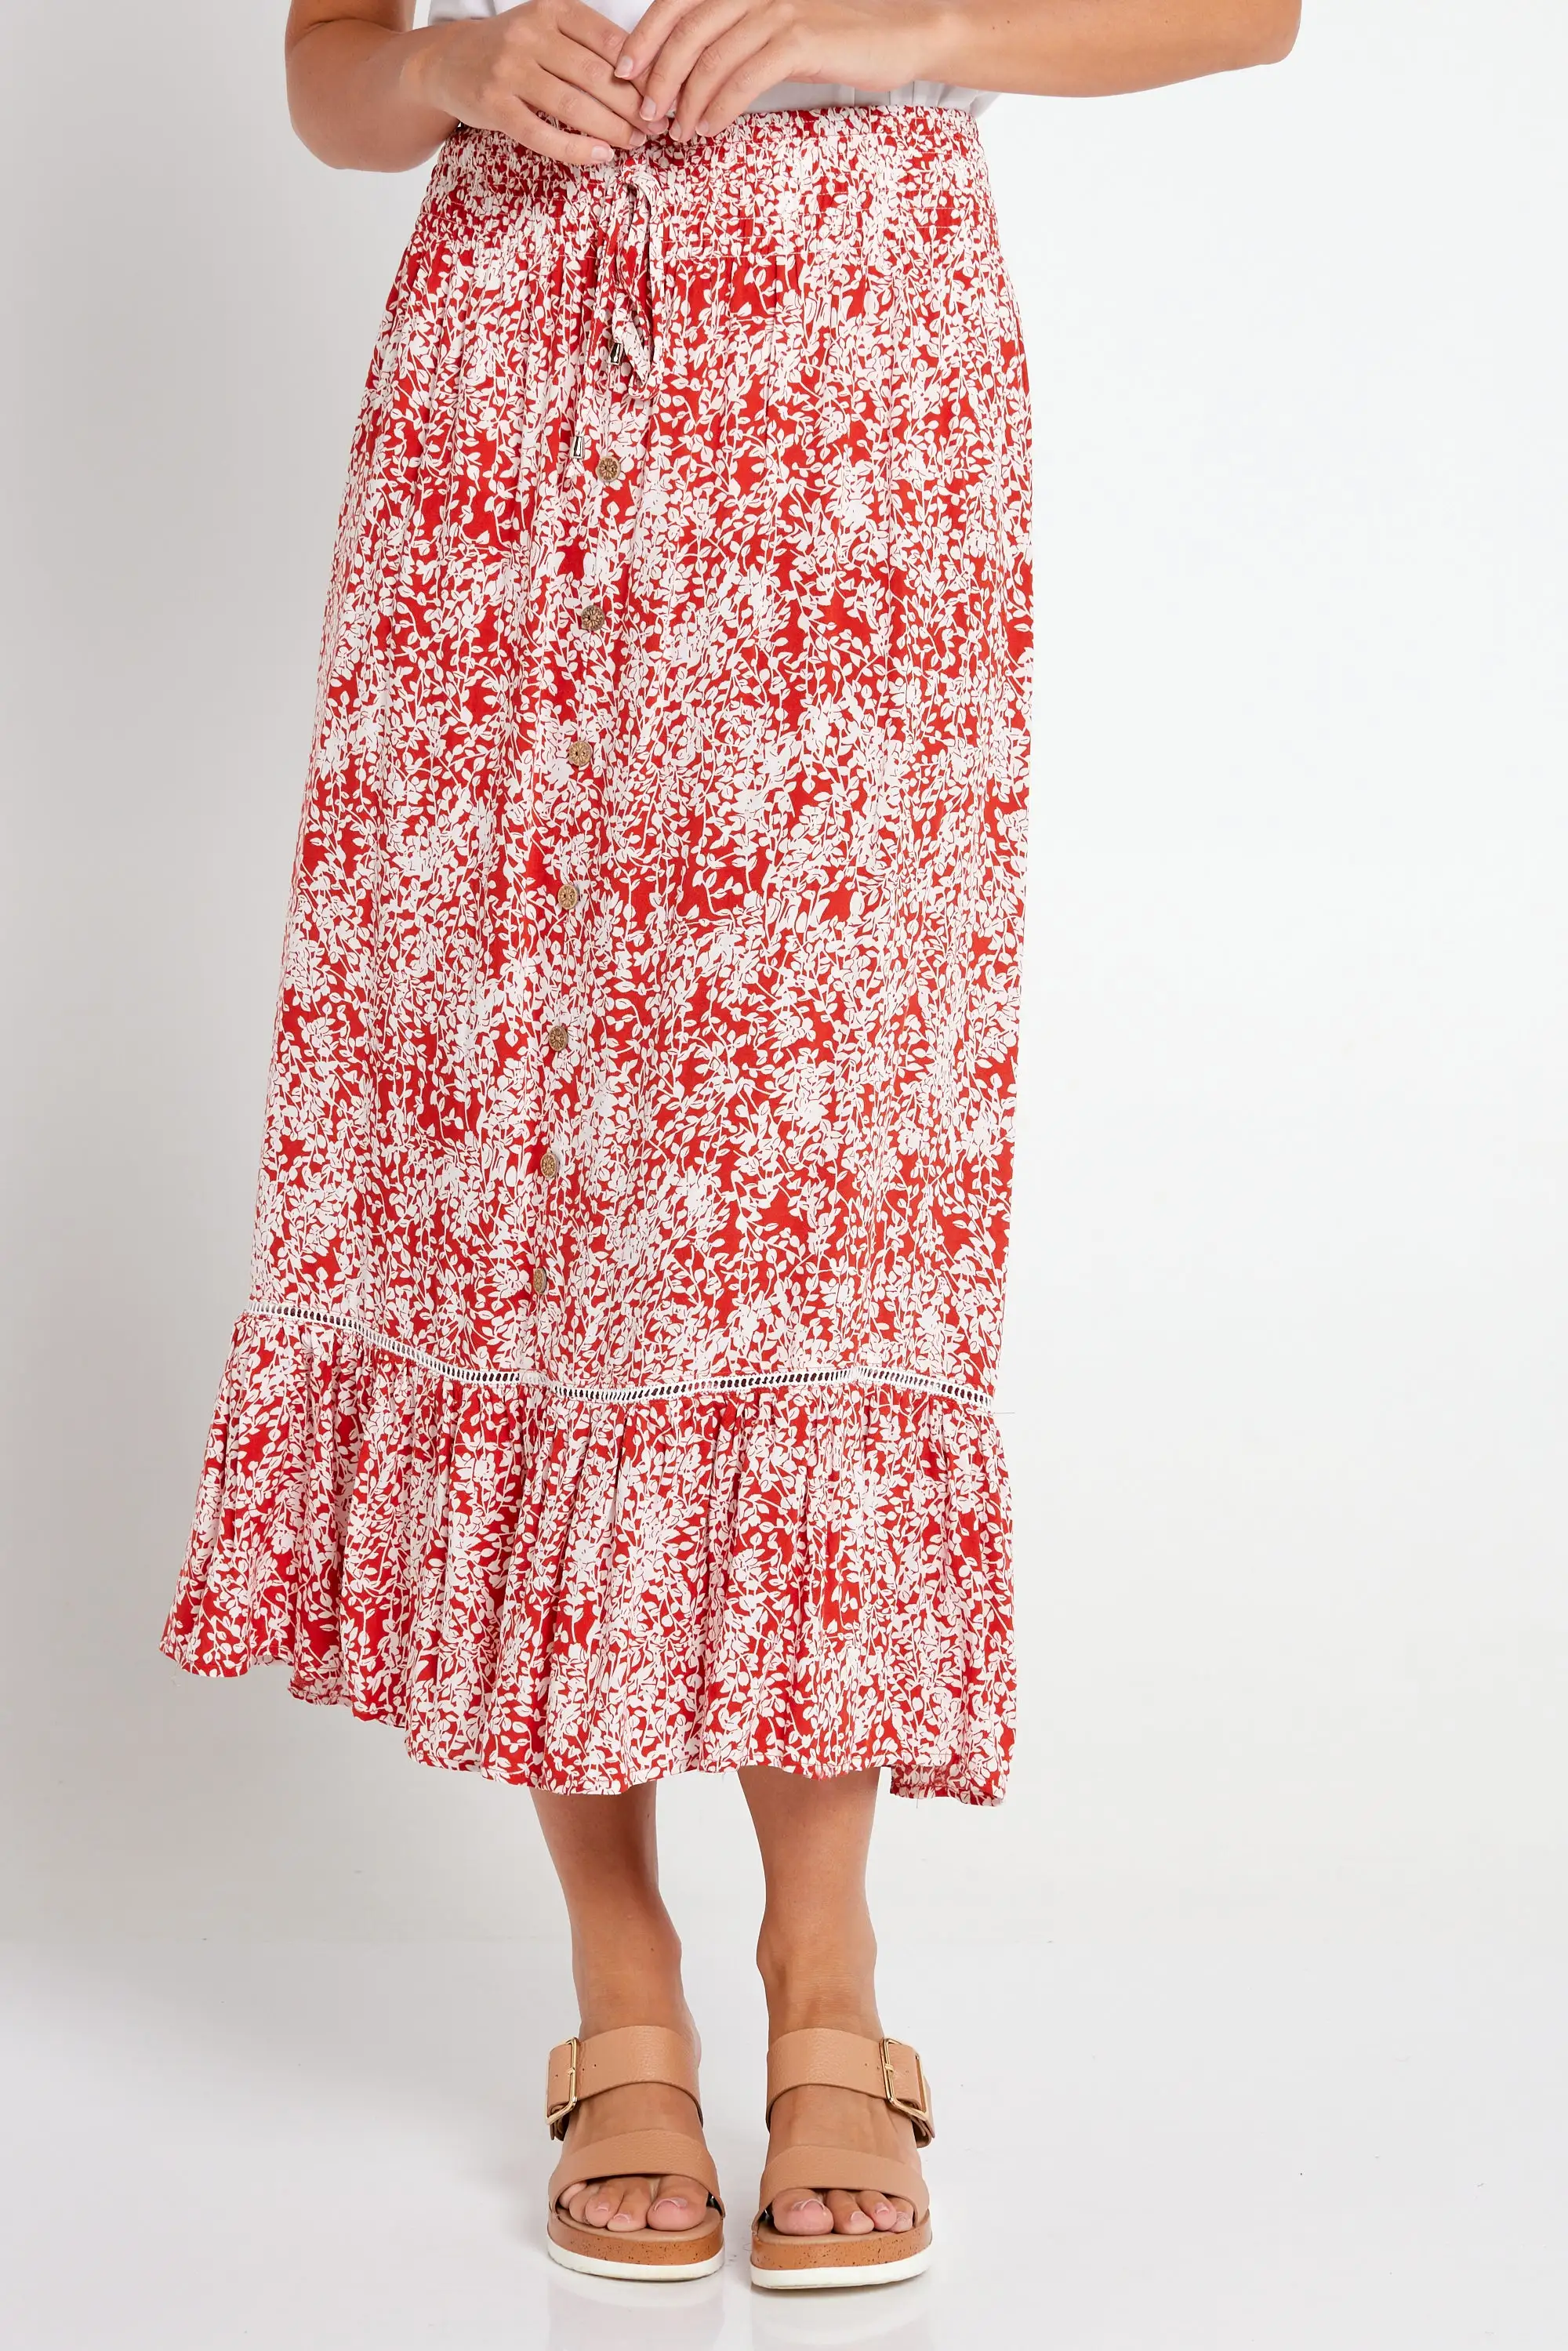 Pearl Maxi Skirt - Rust Floral